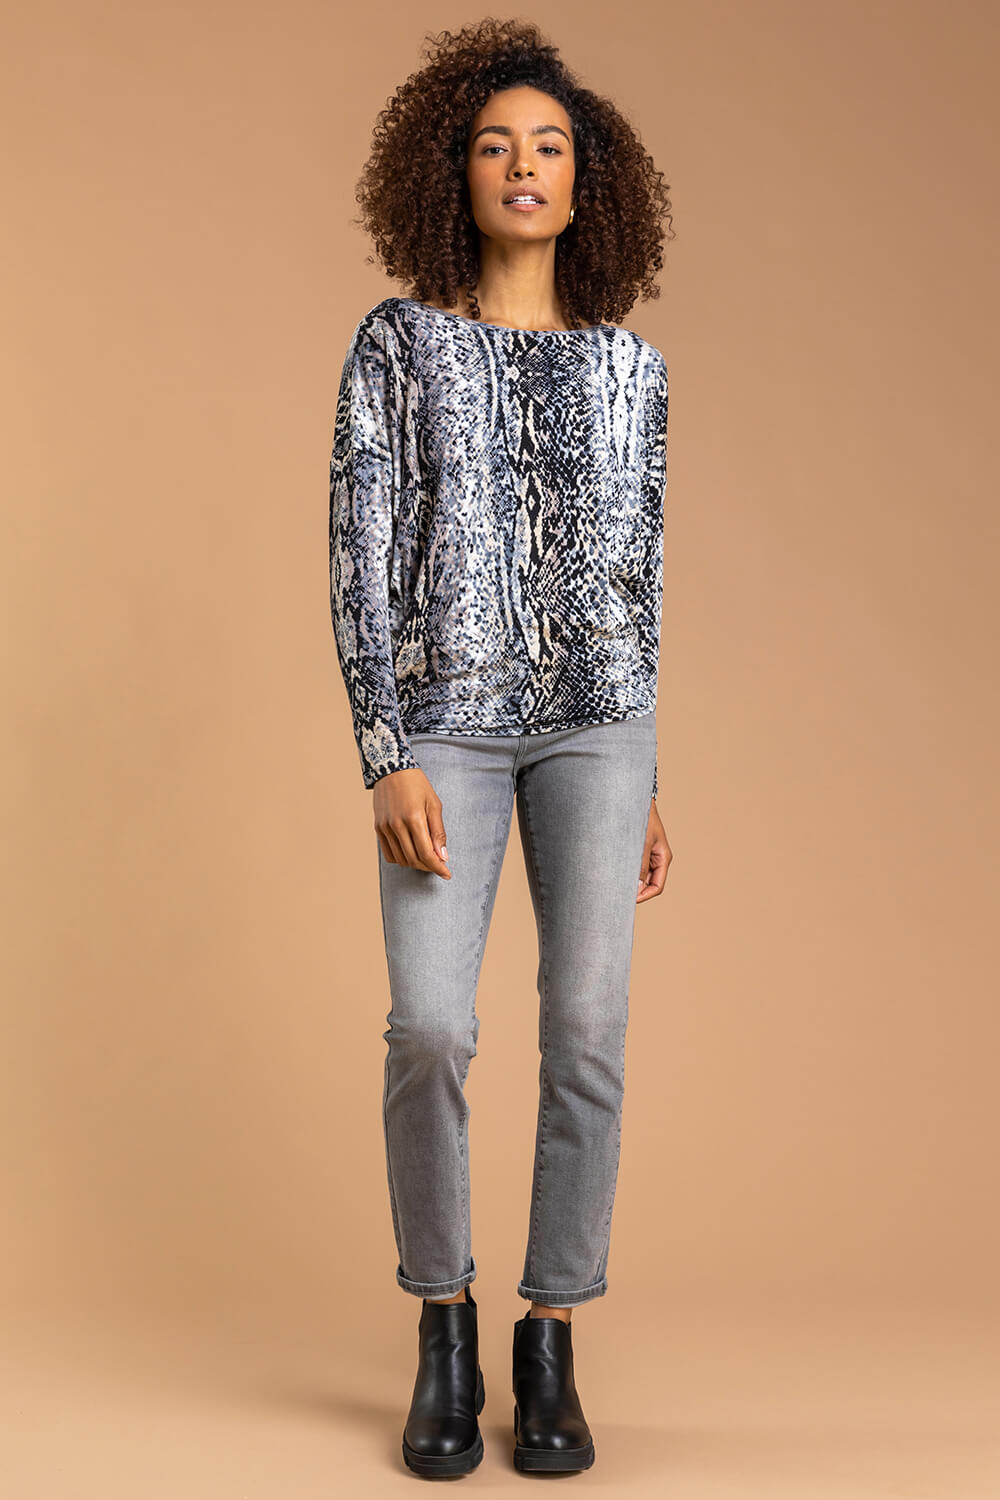 Steel Blue Abstract Animal Print Tunic Top, Image 3 of 4